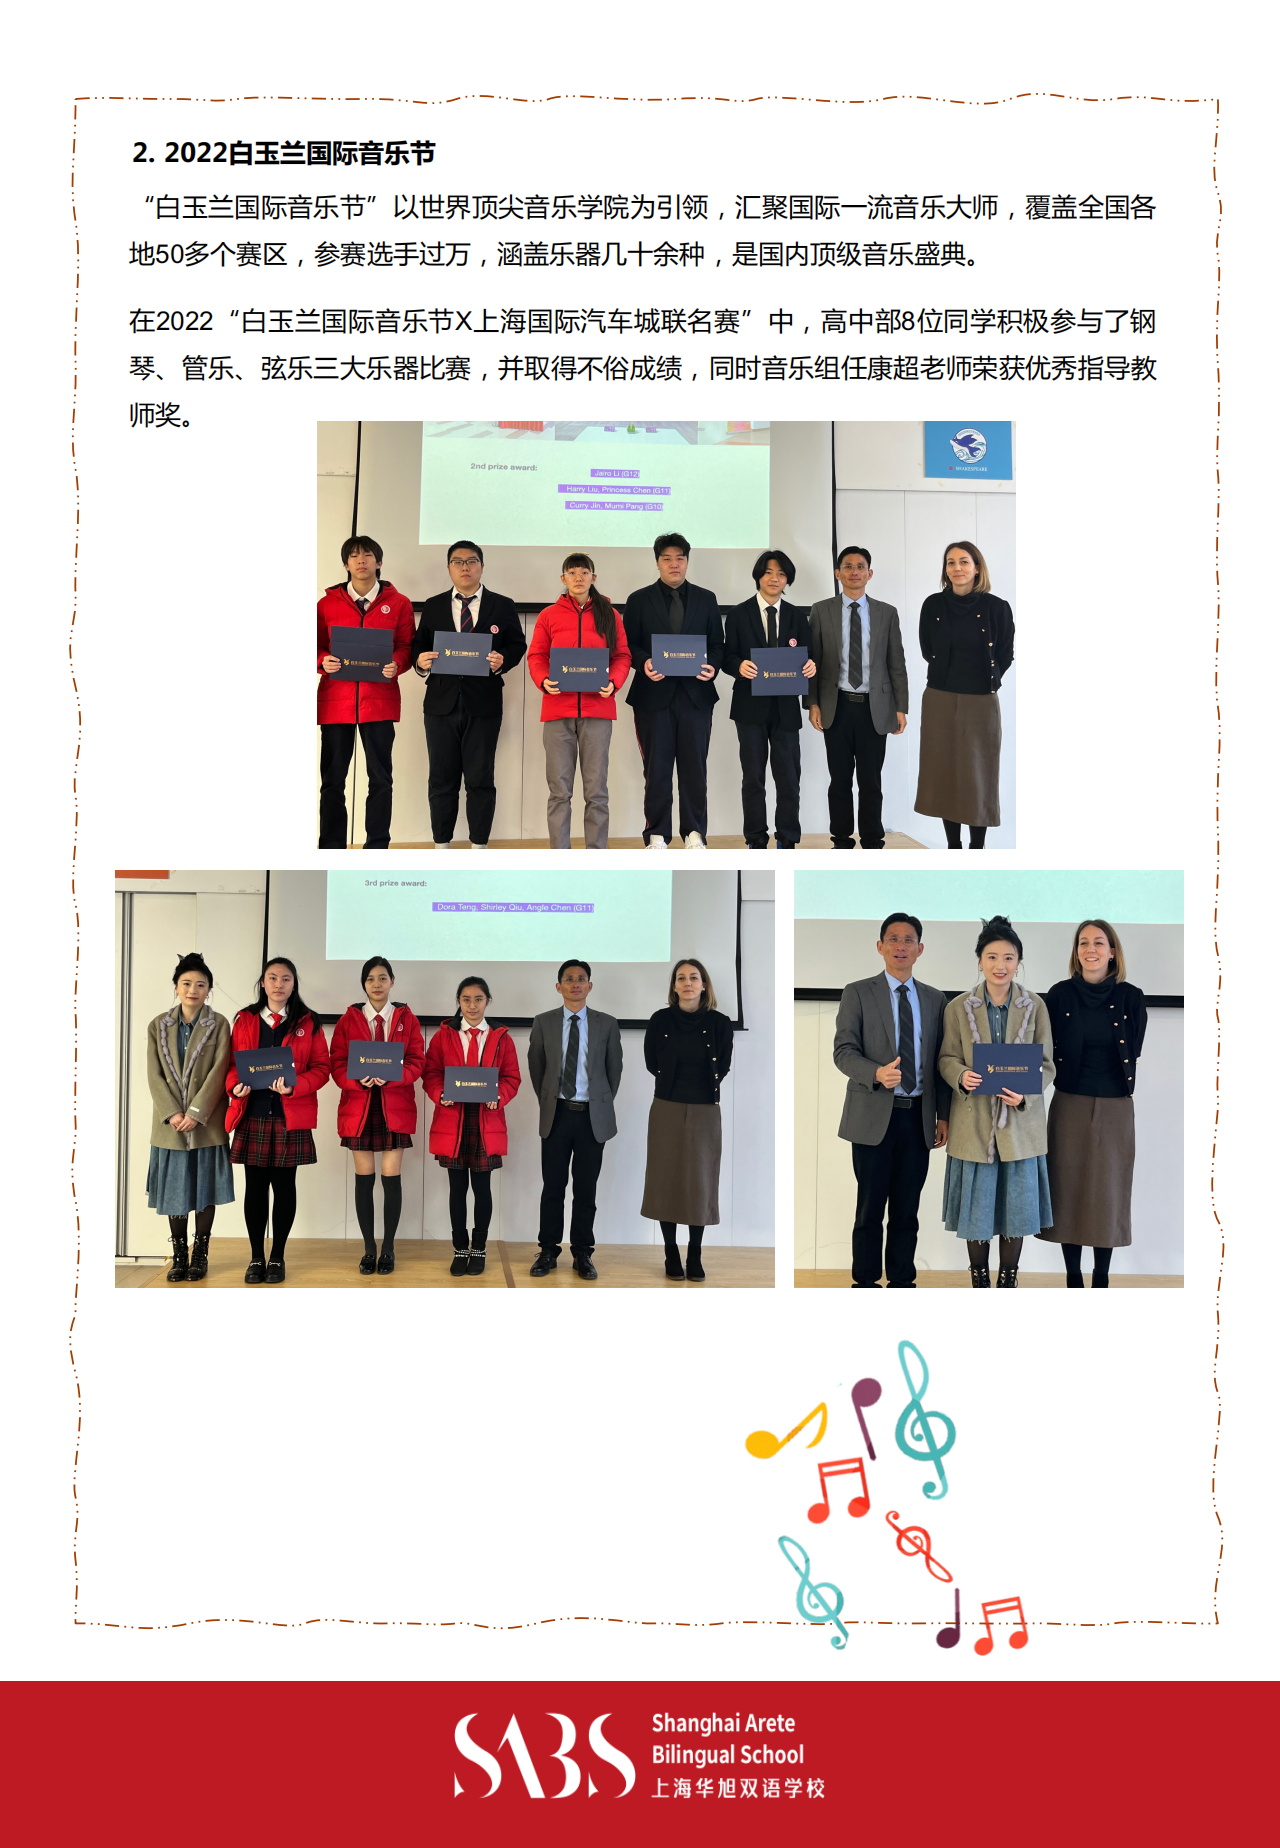 HS 1st Issue Newsletter- Chinese Version_10.png